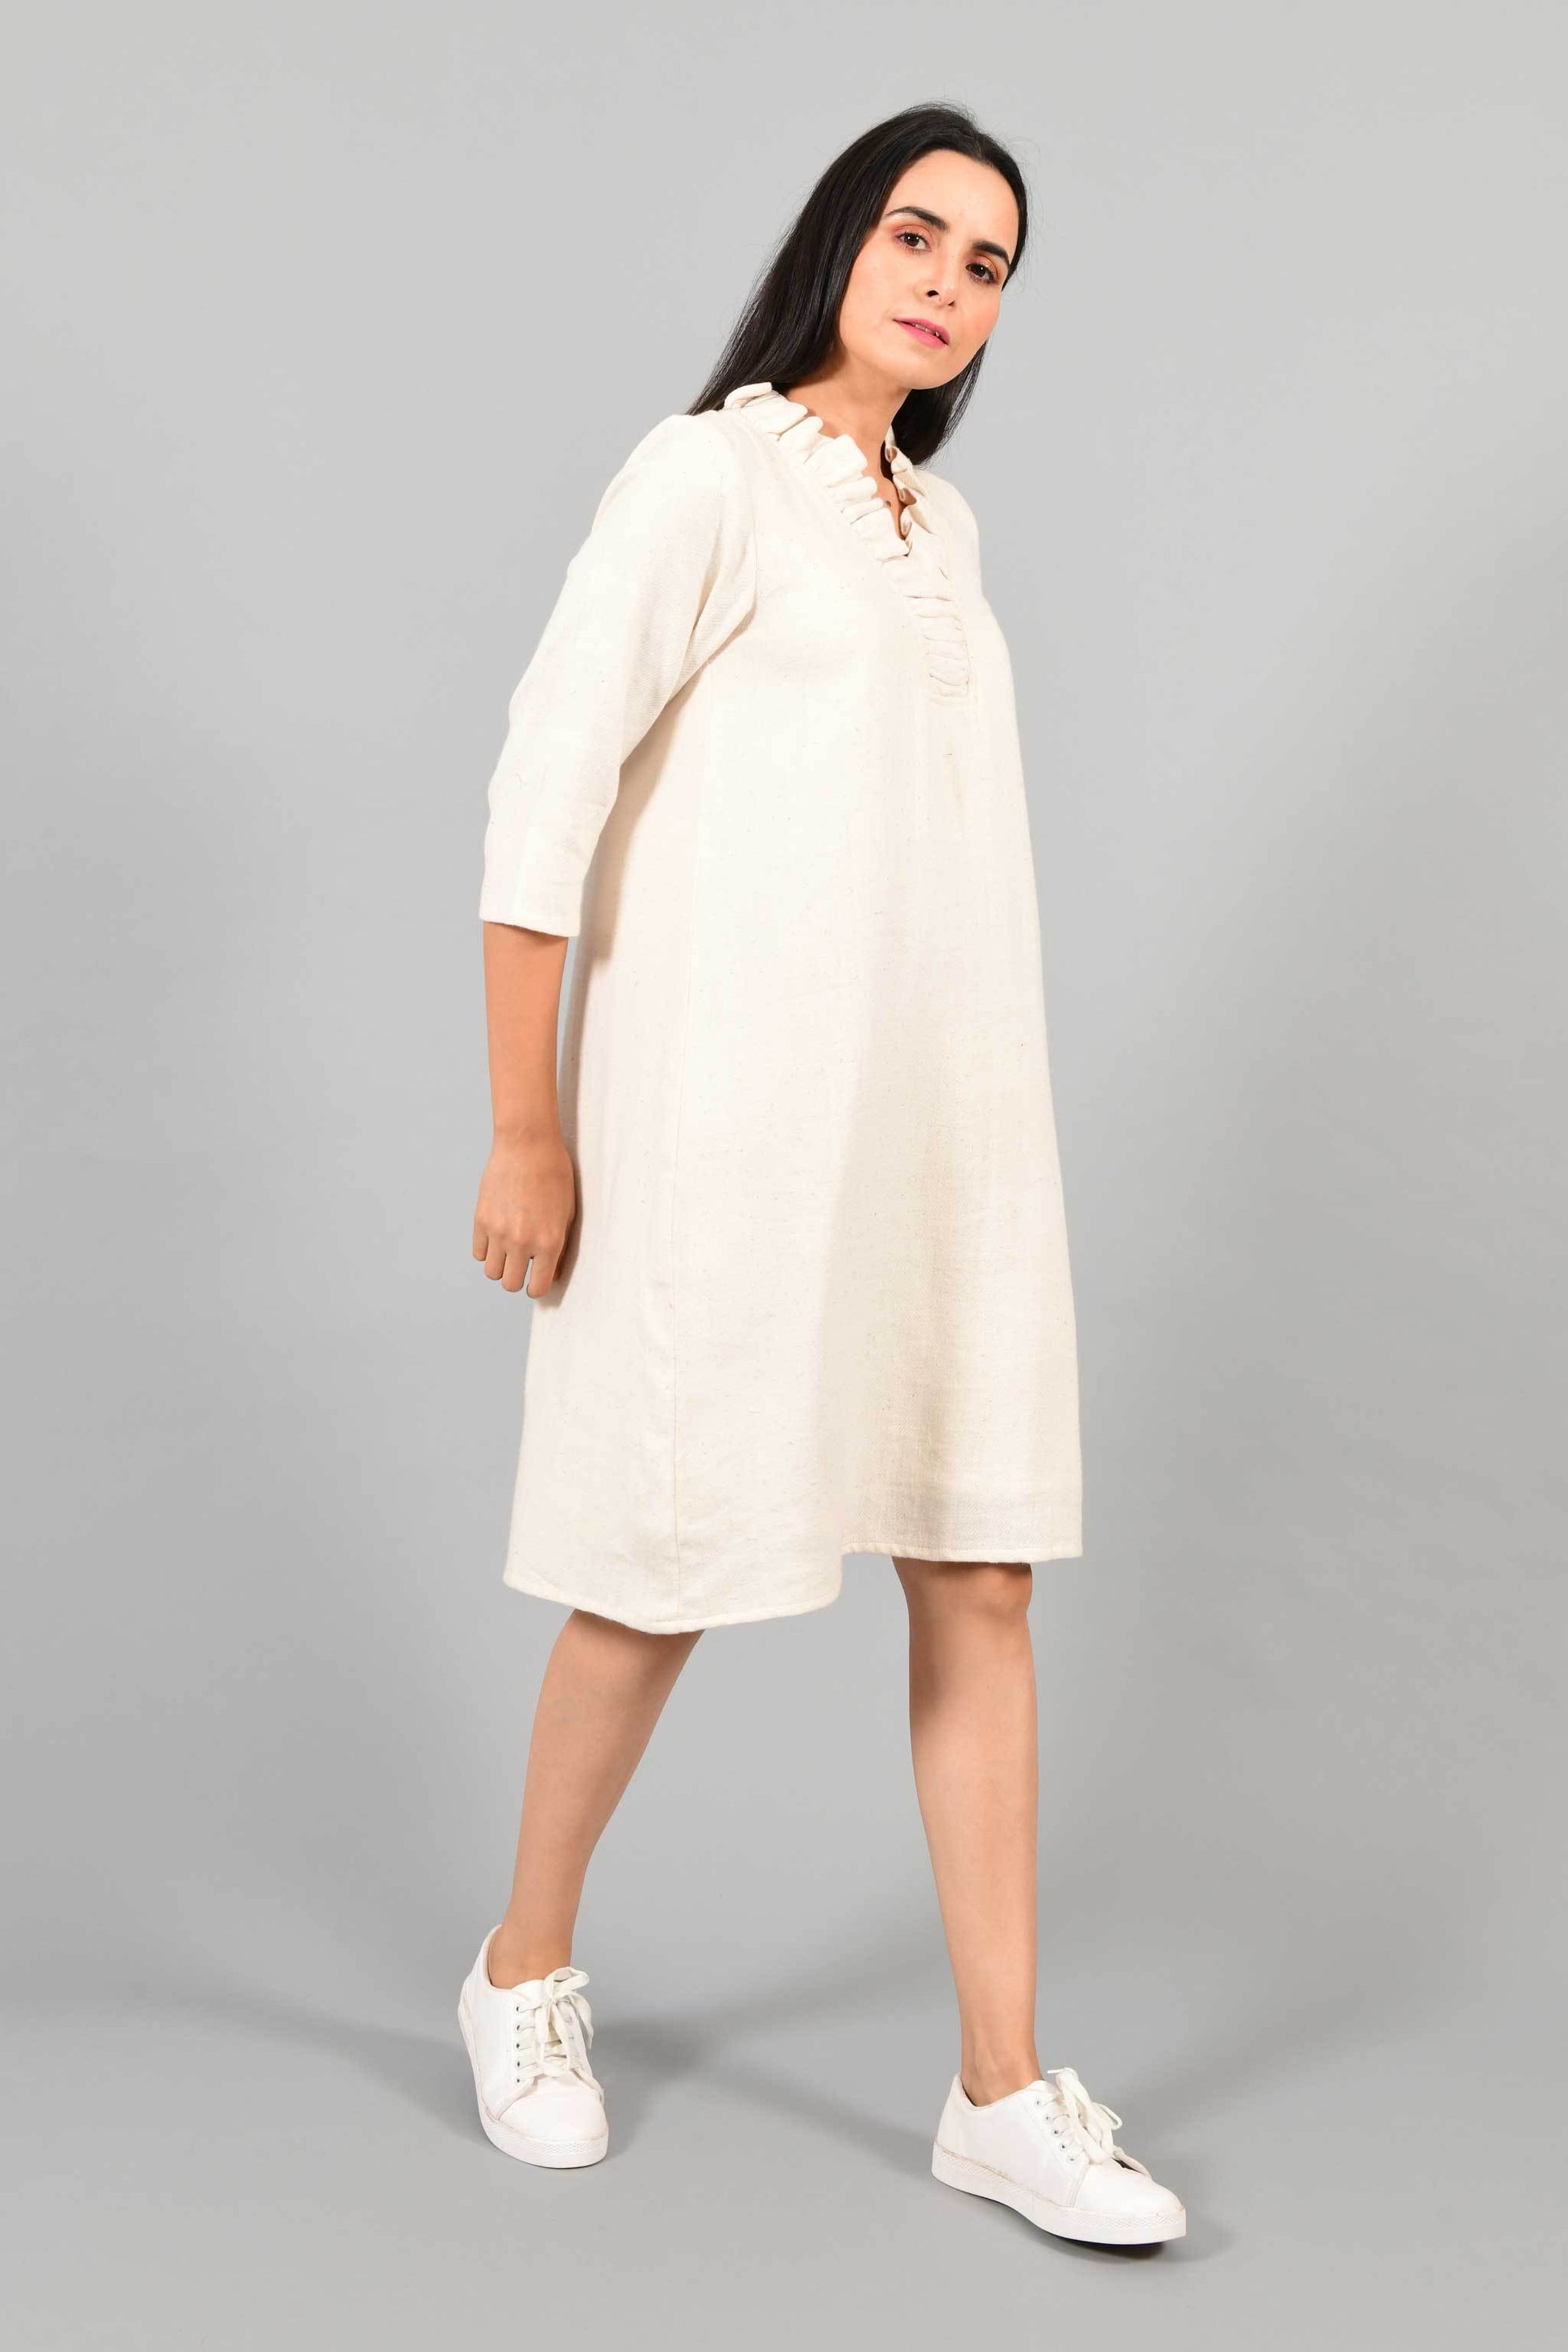 Side pose of an Indian female womenswear fashion model in an off-white Cashmere Cotton Dress with flared neck, made using handspun and handwoven khadi cotton by Cotton Rack.